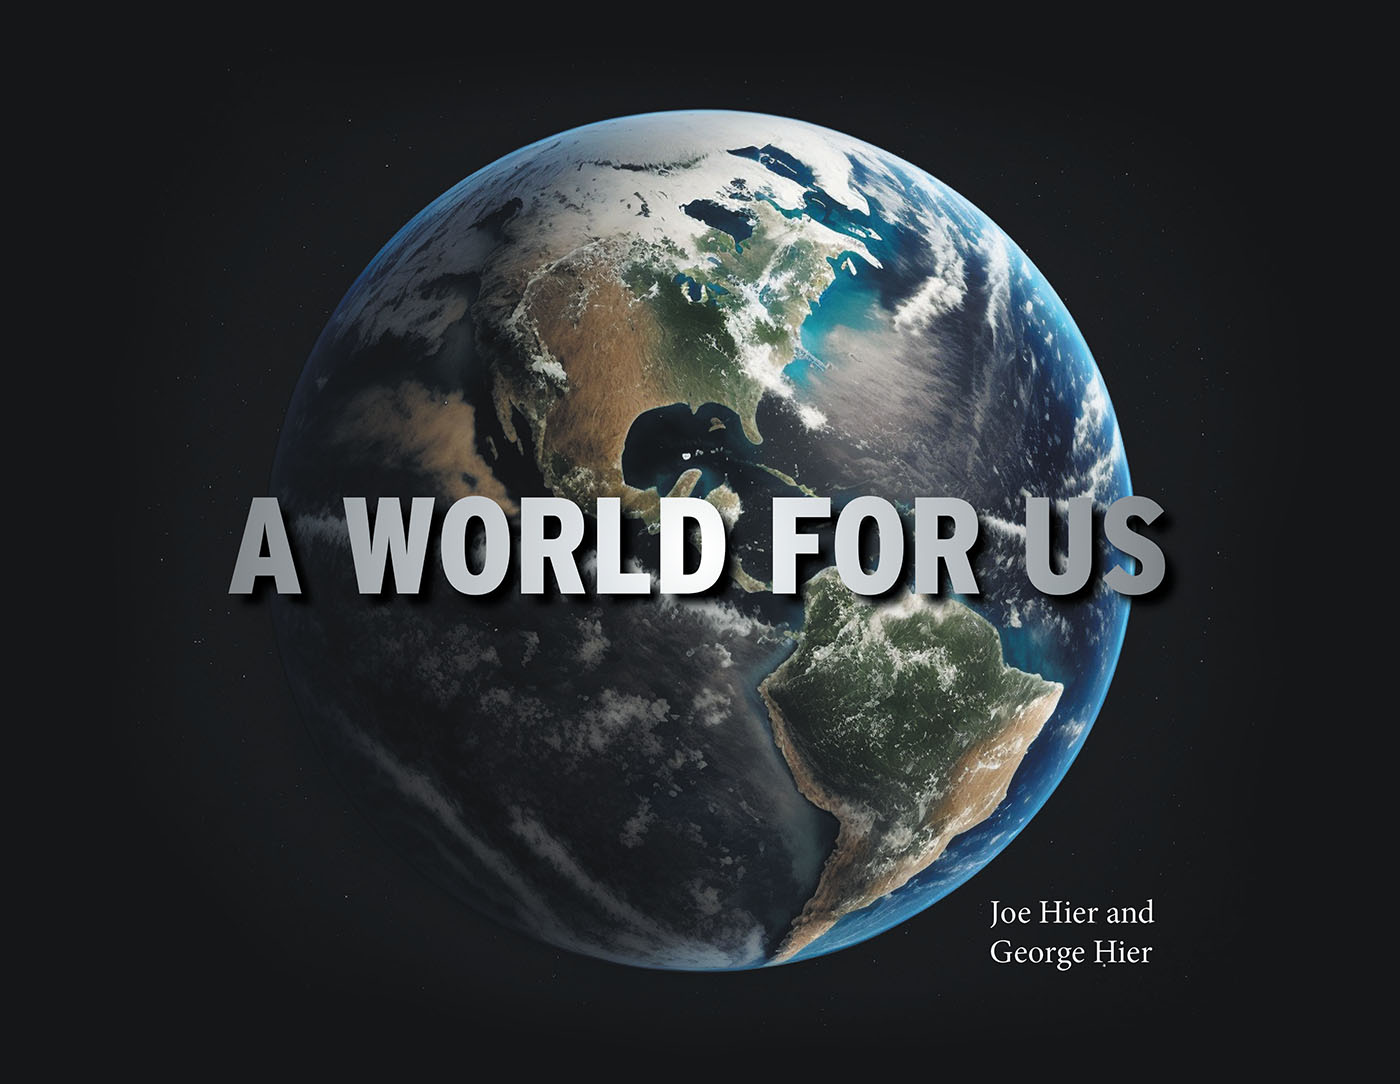 Authors Joe Hier and George Hier’s New Book, “A World For Us,” is a Heartwarming Tale Exploring Earth’s Treasures – Water, Sky, Plants, Fish, Birds, Animals, and People